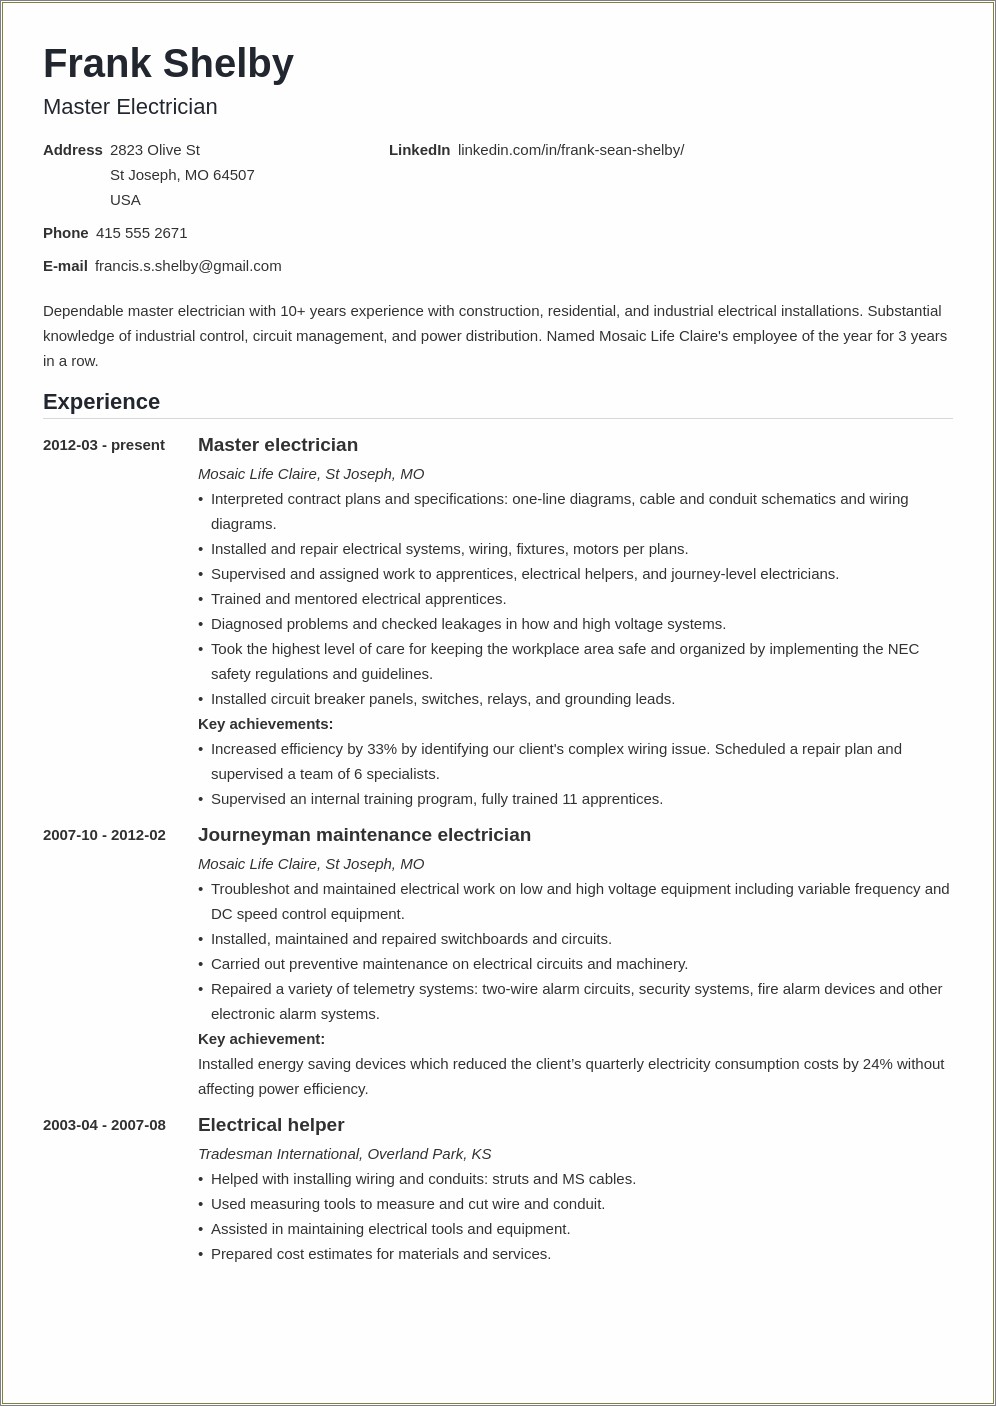 Resume Synonym For Oversee Or Manage